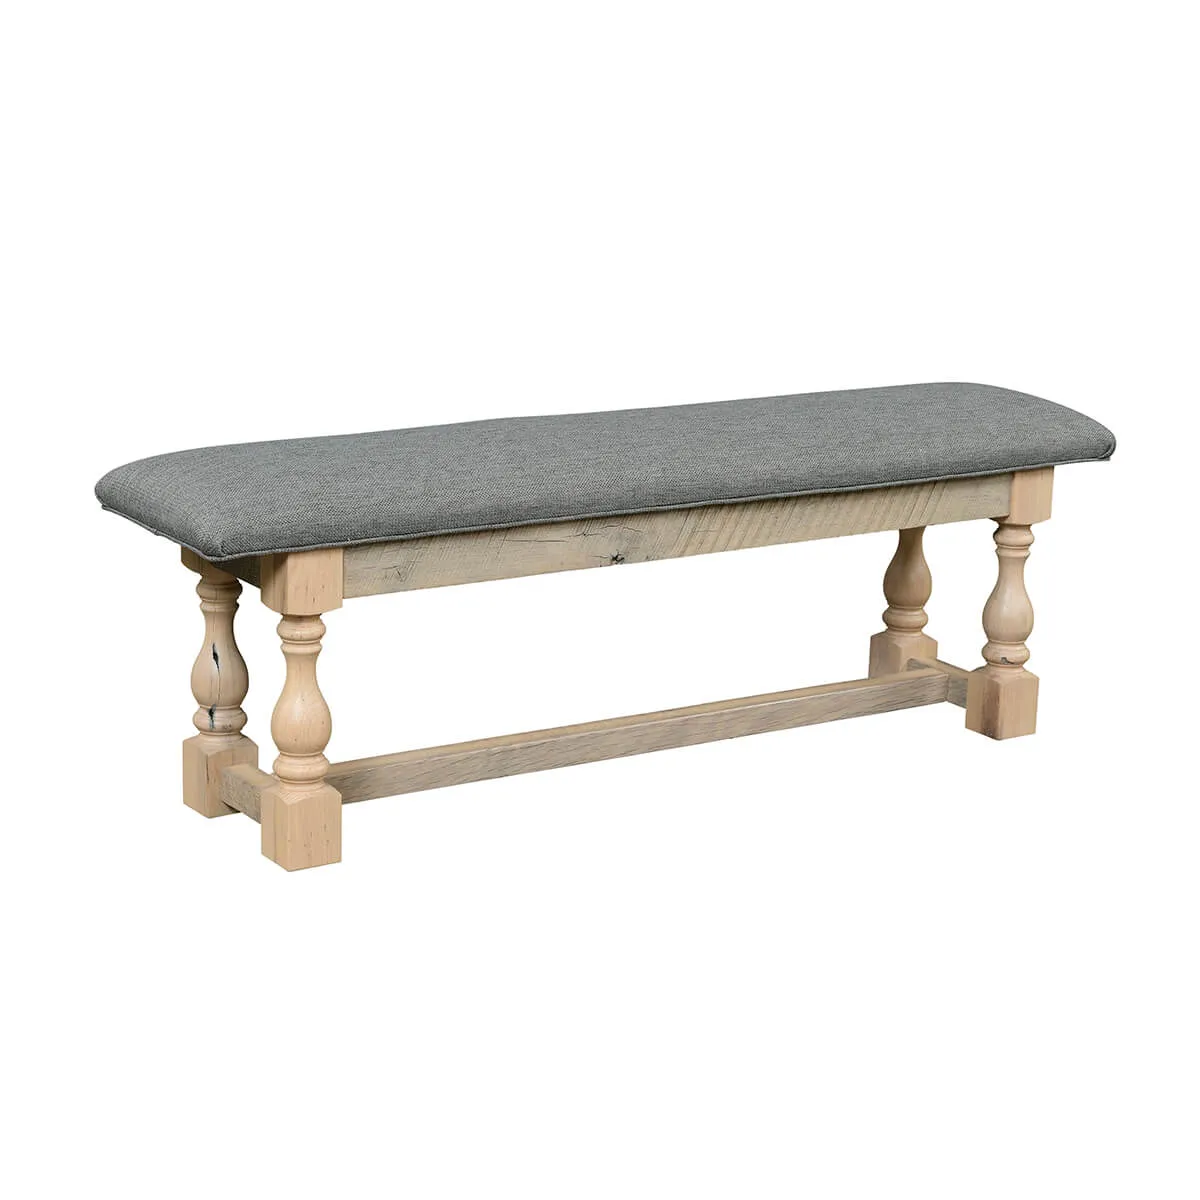 Midland Bench with Upholstered Seat